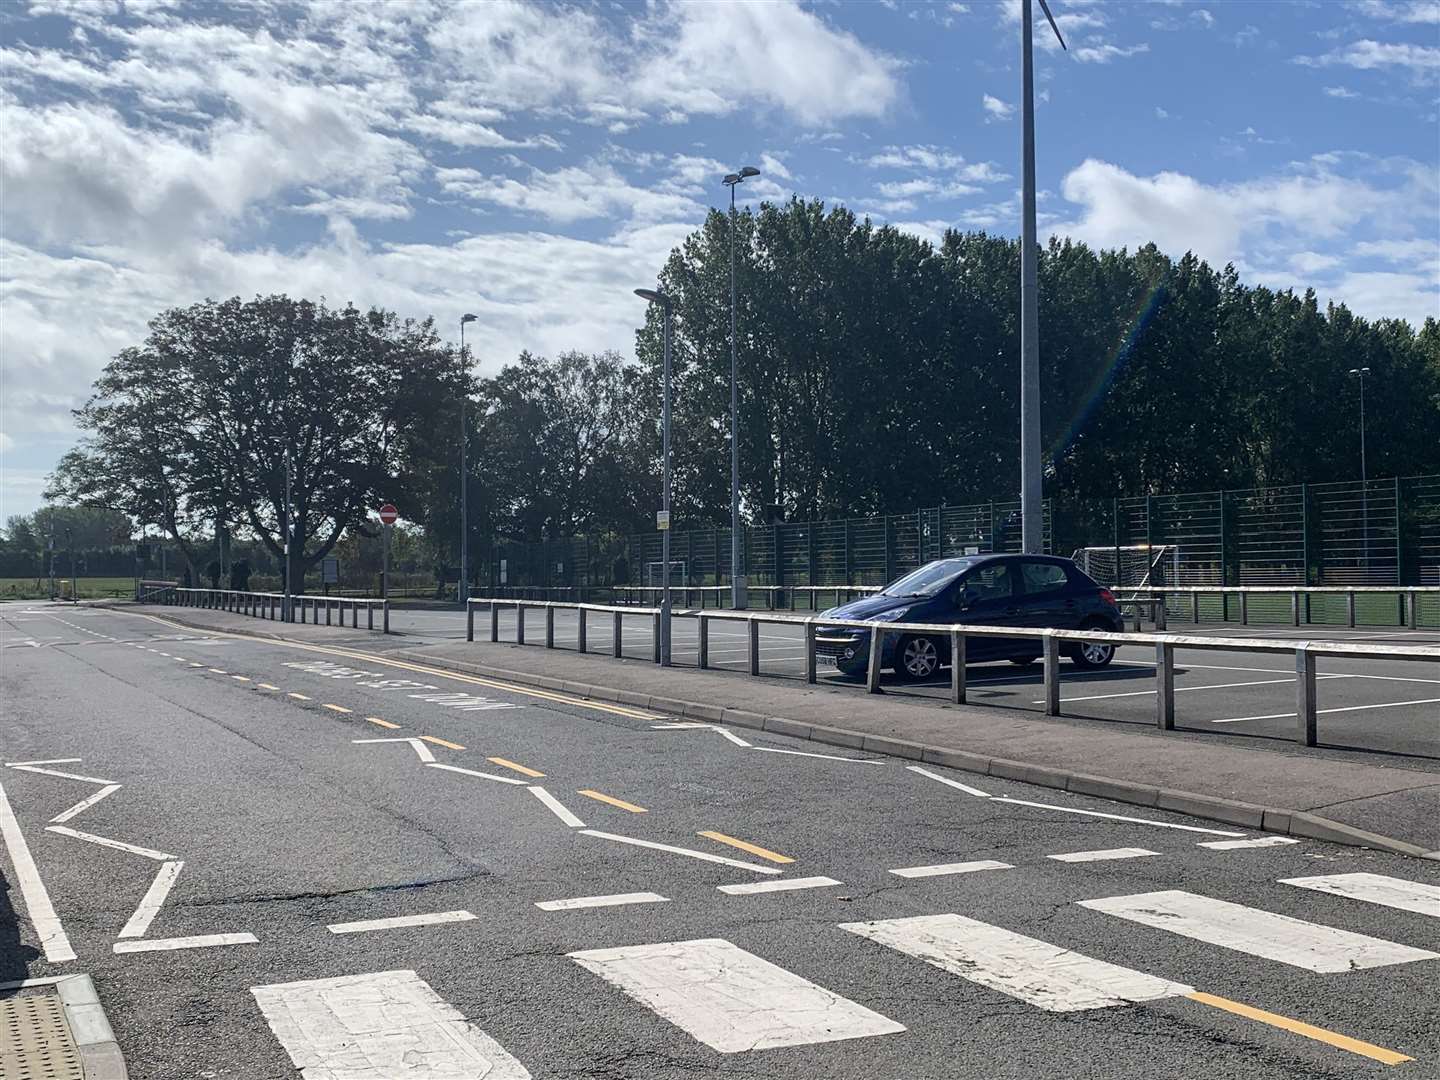 The empty car park at Sandwich Technology School on GCSE results day 2020